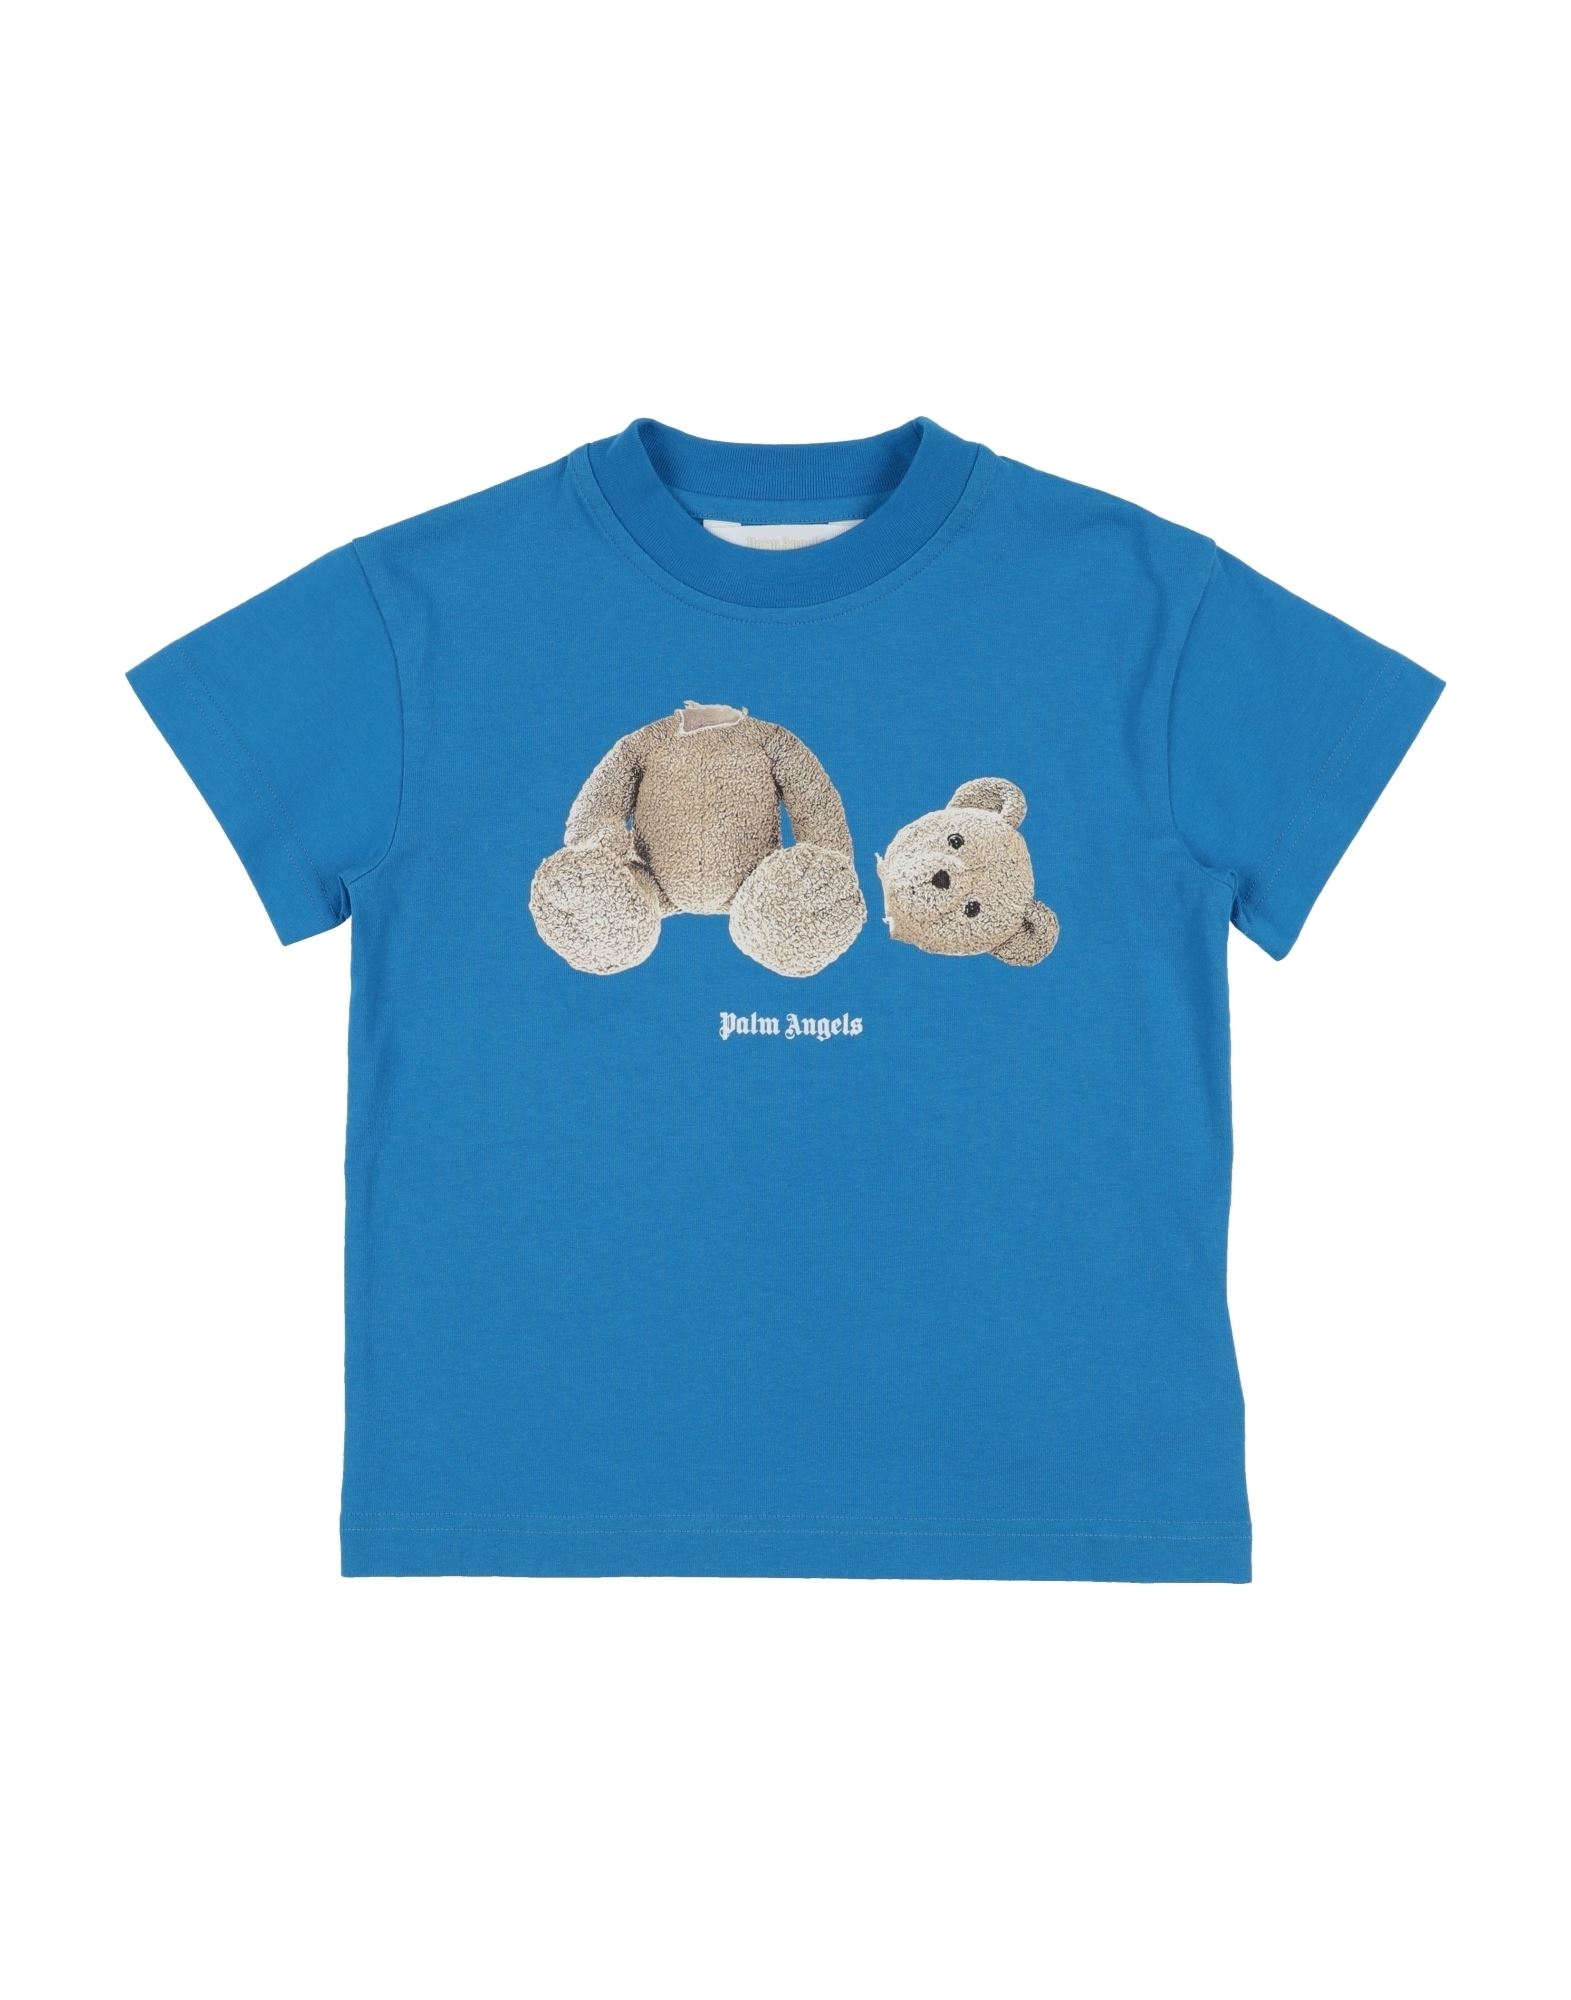 Palm Angels Kids' T-shirts In Azure